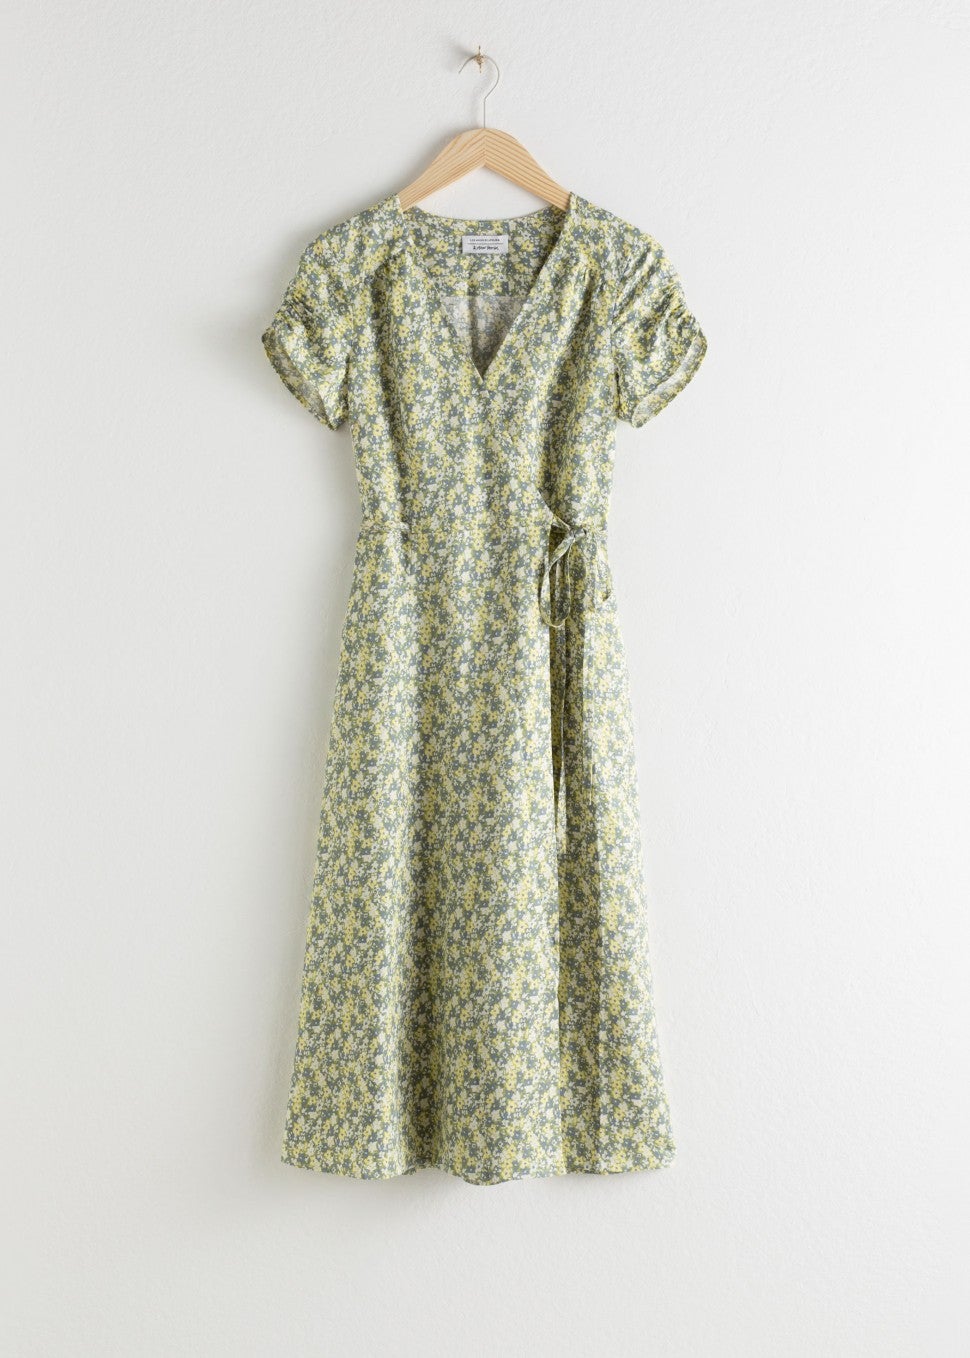 & Other Stories floral wrap dress